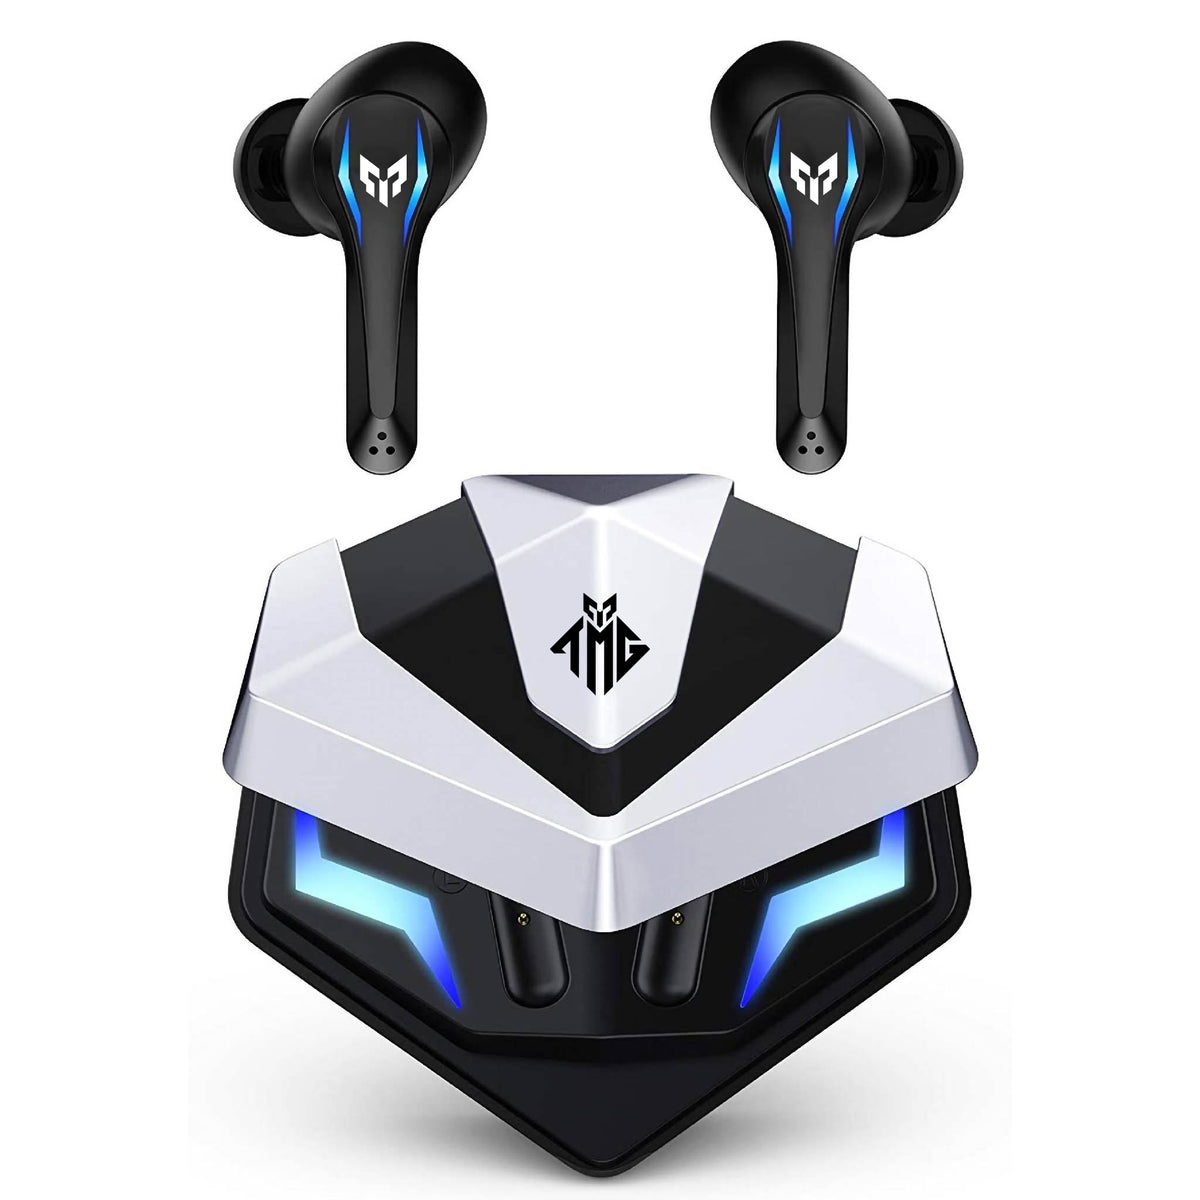 The Mysterious Gamer TMG Gaming Earbuds